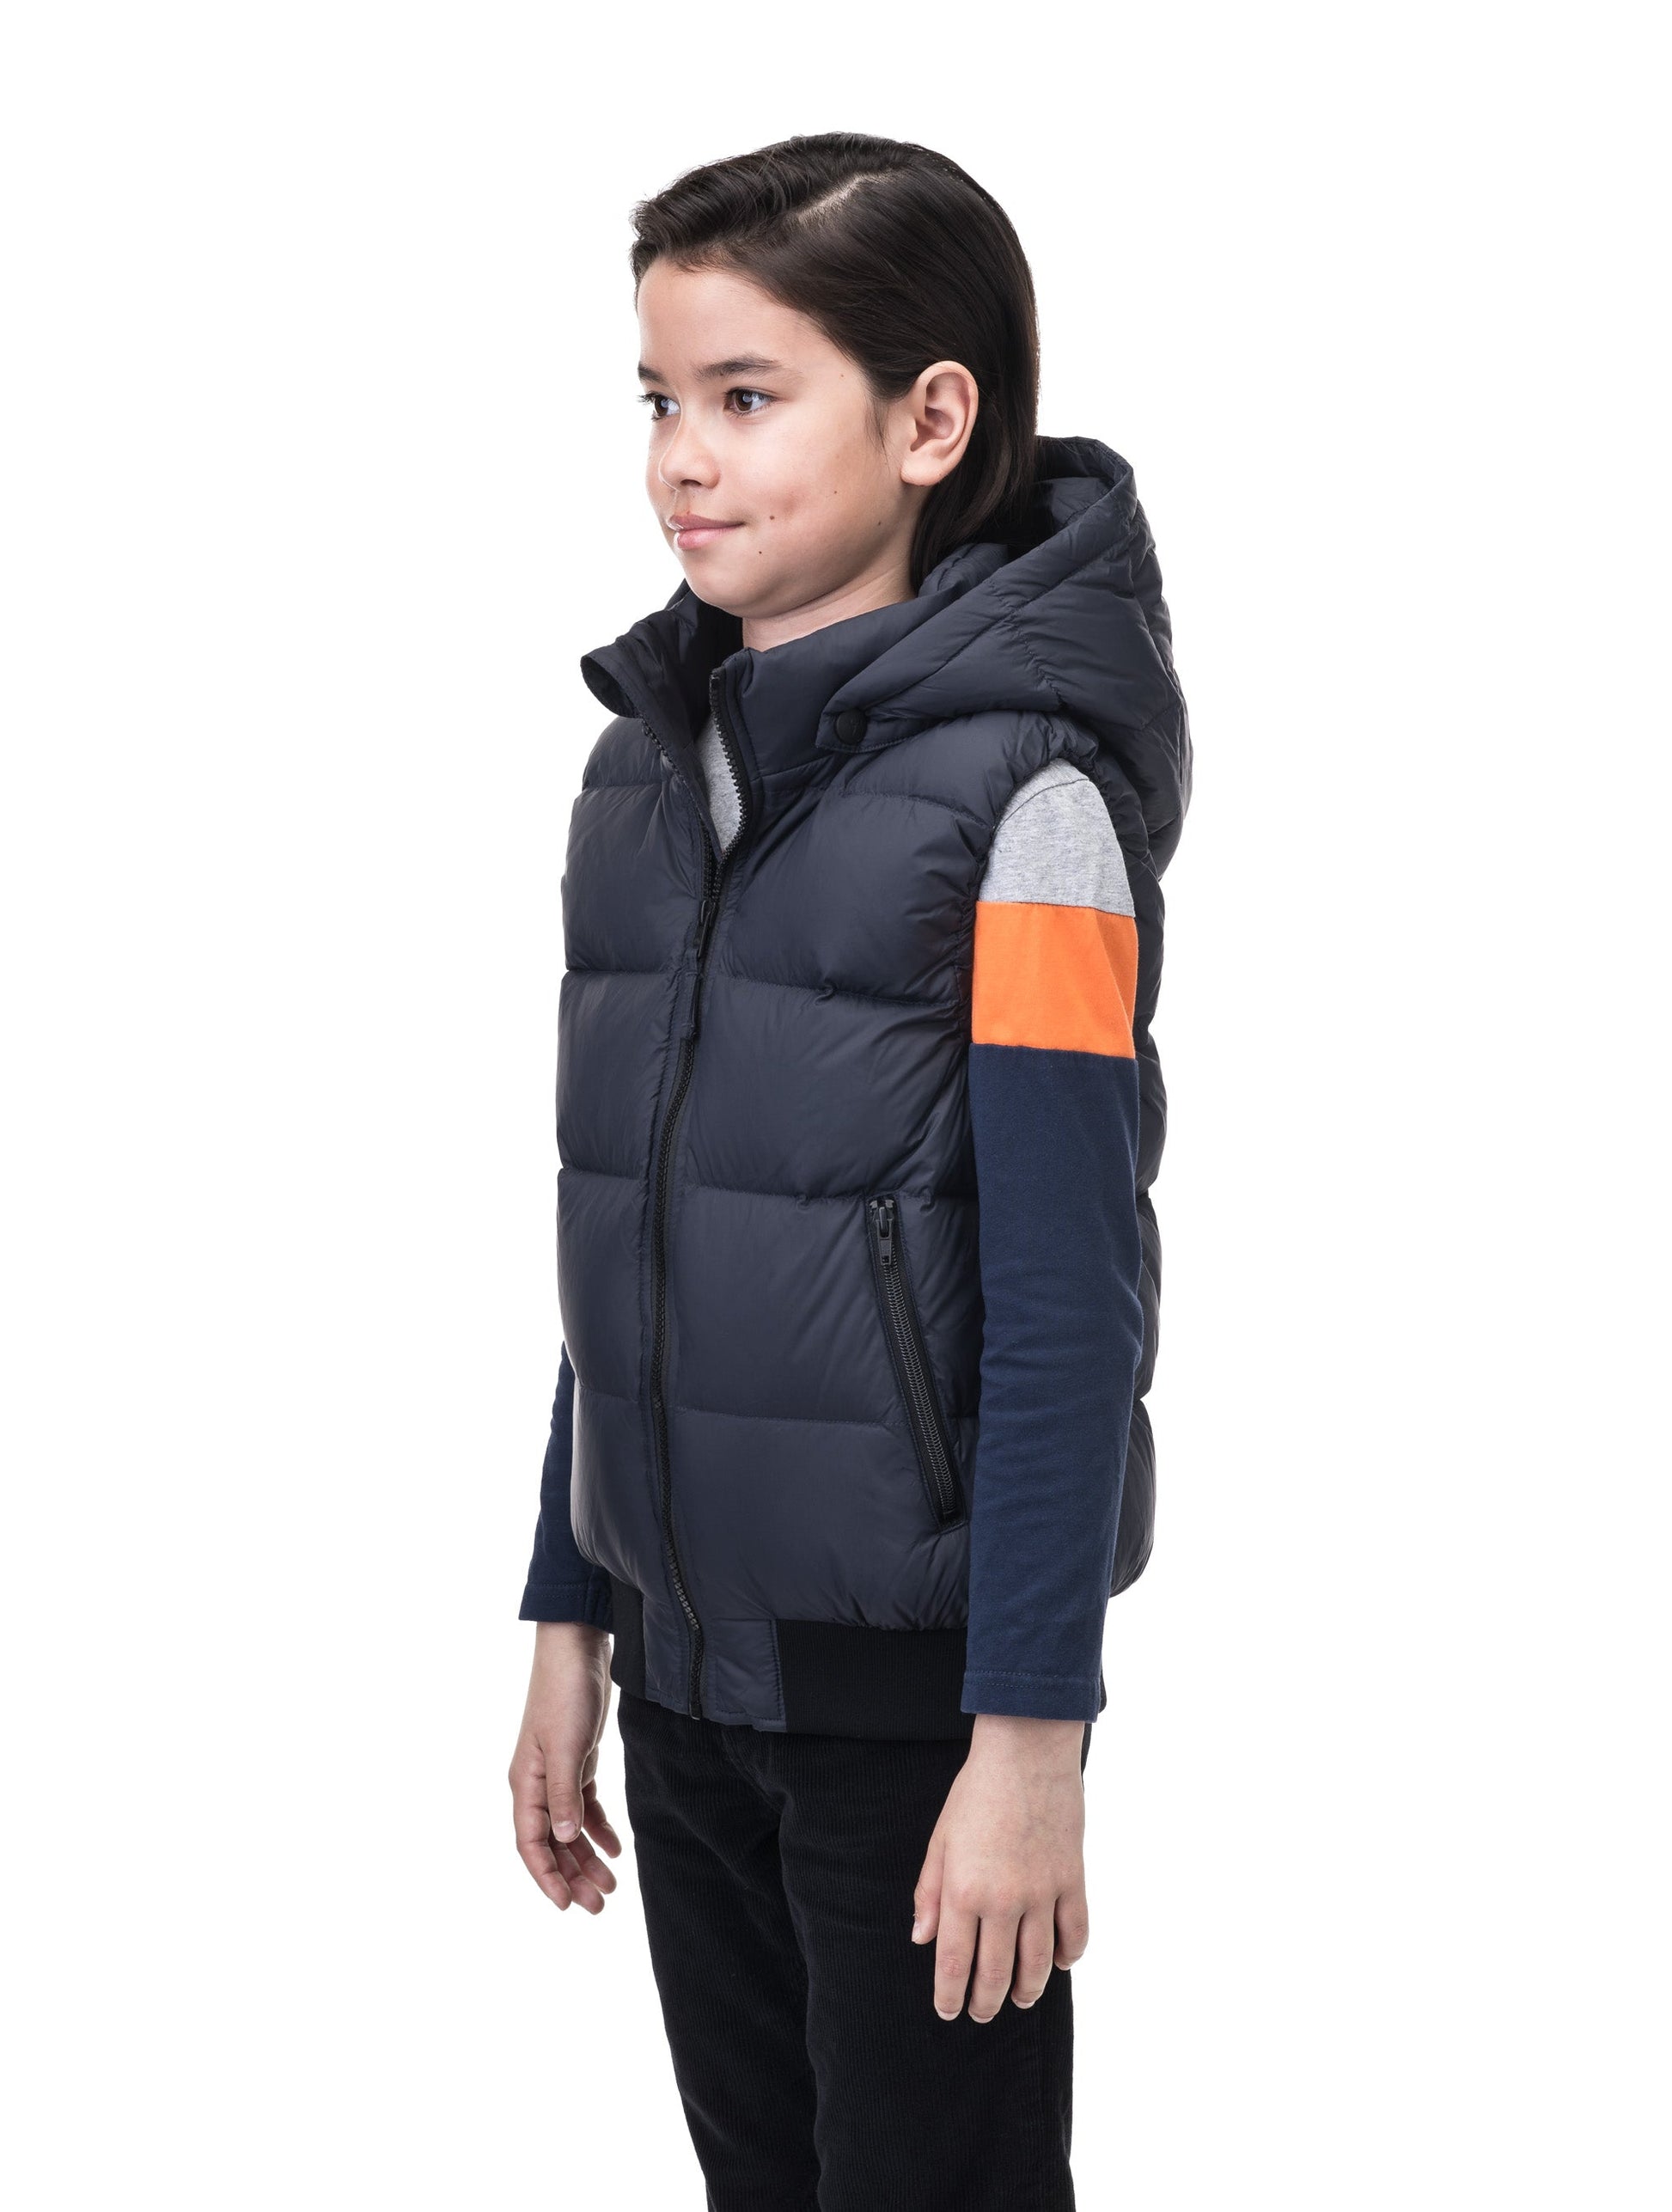 Sleeveless down filled kids vest with a hood and contrast zipper details in Navy